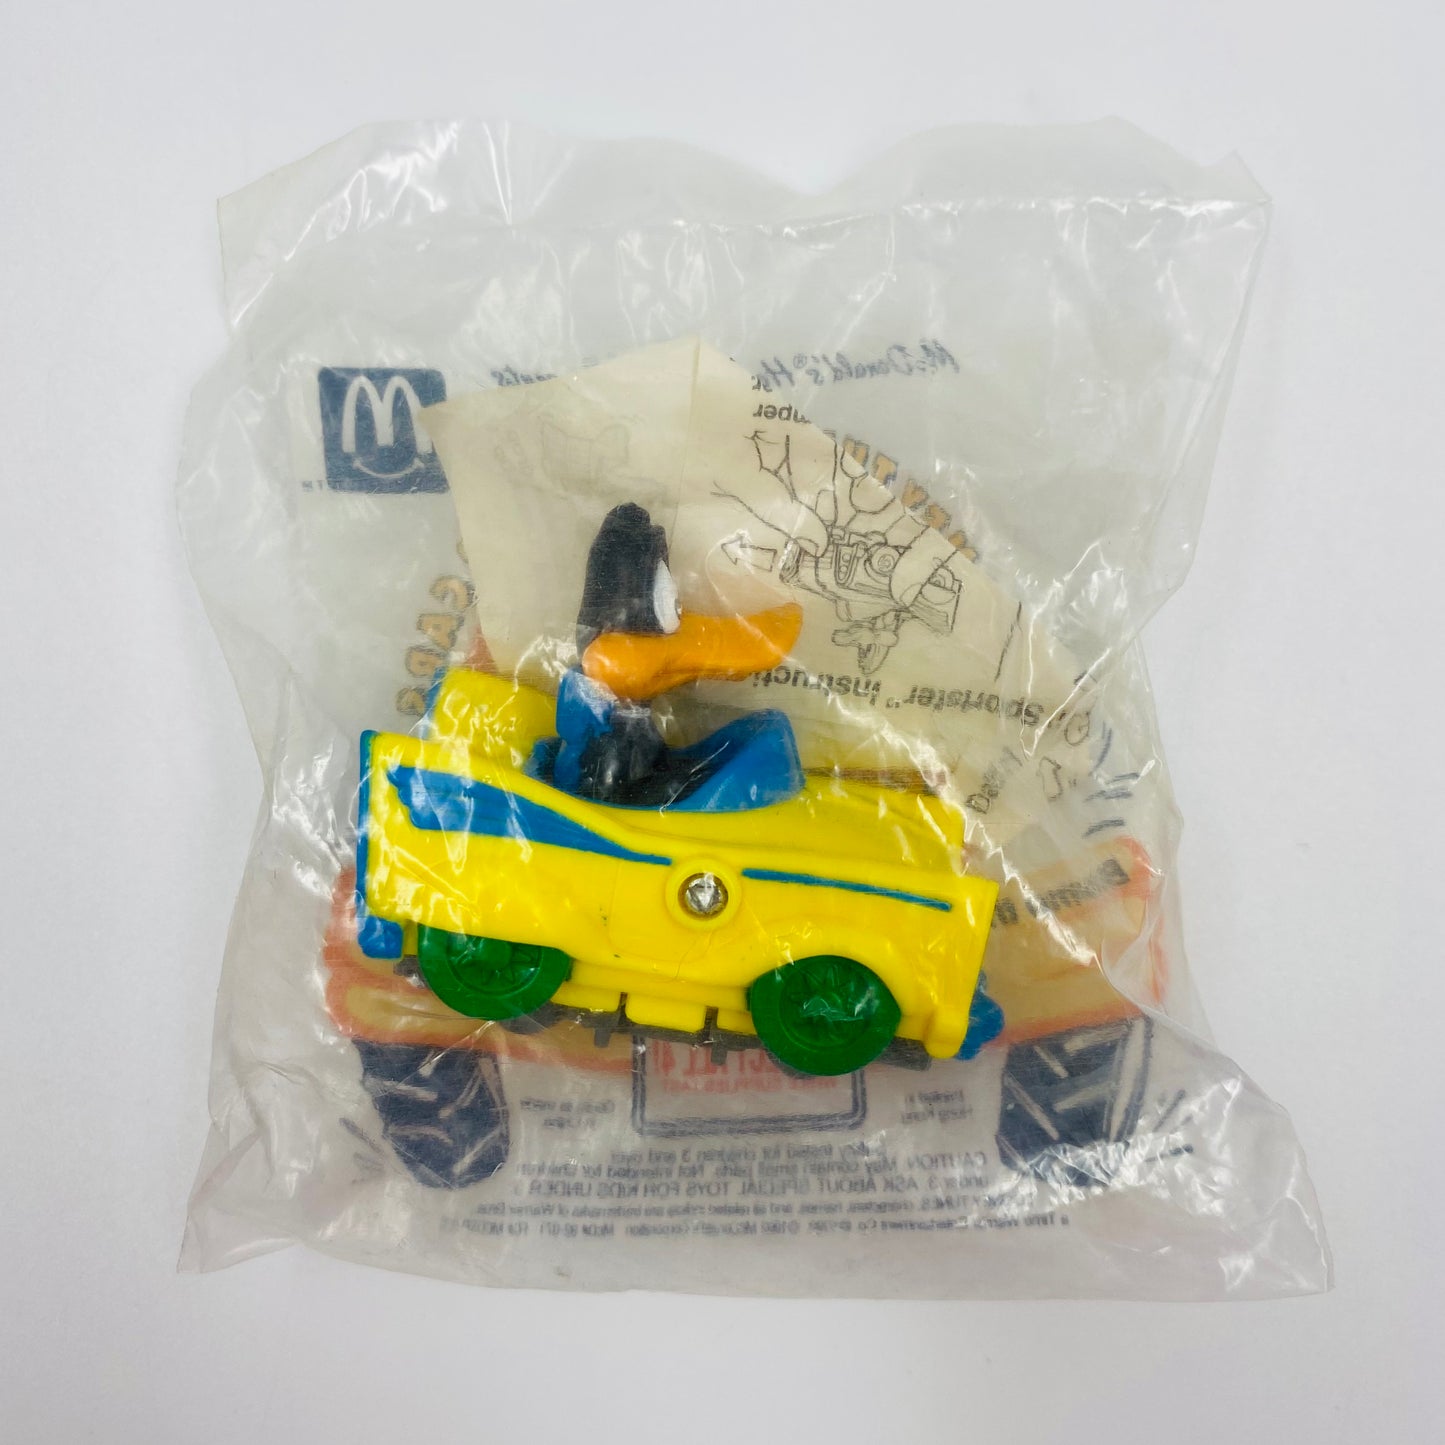 Looney Tunes Quack-Up Cars Daffy Splittin' Sportster McDonald's Happy Meal toy (1992) bagged